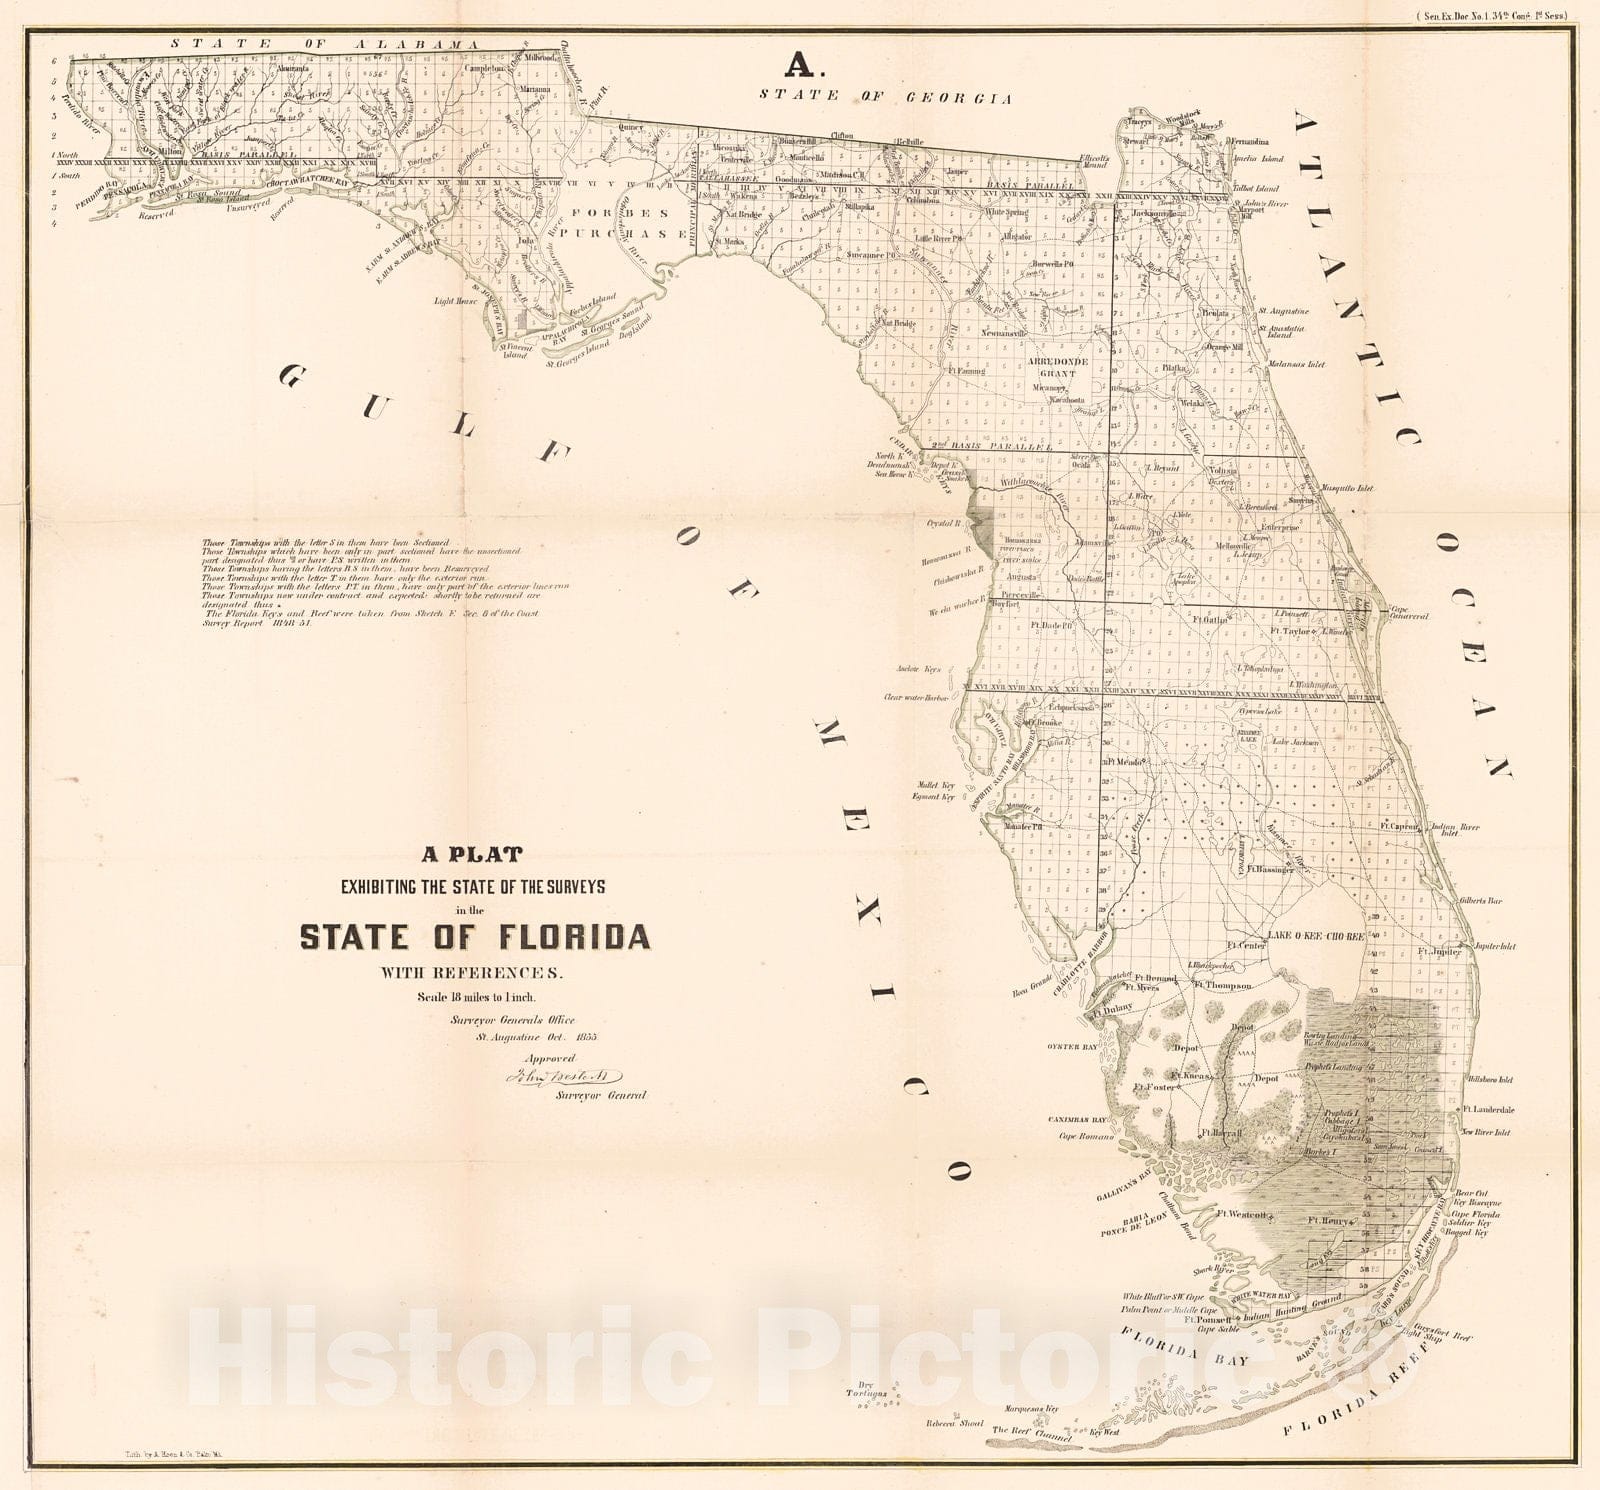 Historic Map : 1855 A Plat Exhibiting the State of the Surveys in the State of Florida : Vintage Wall Art